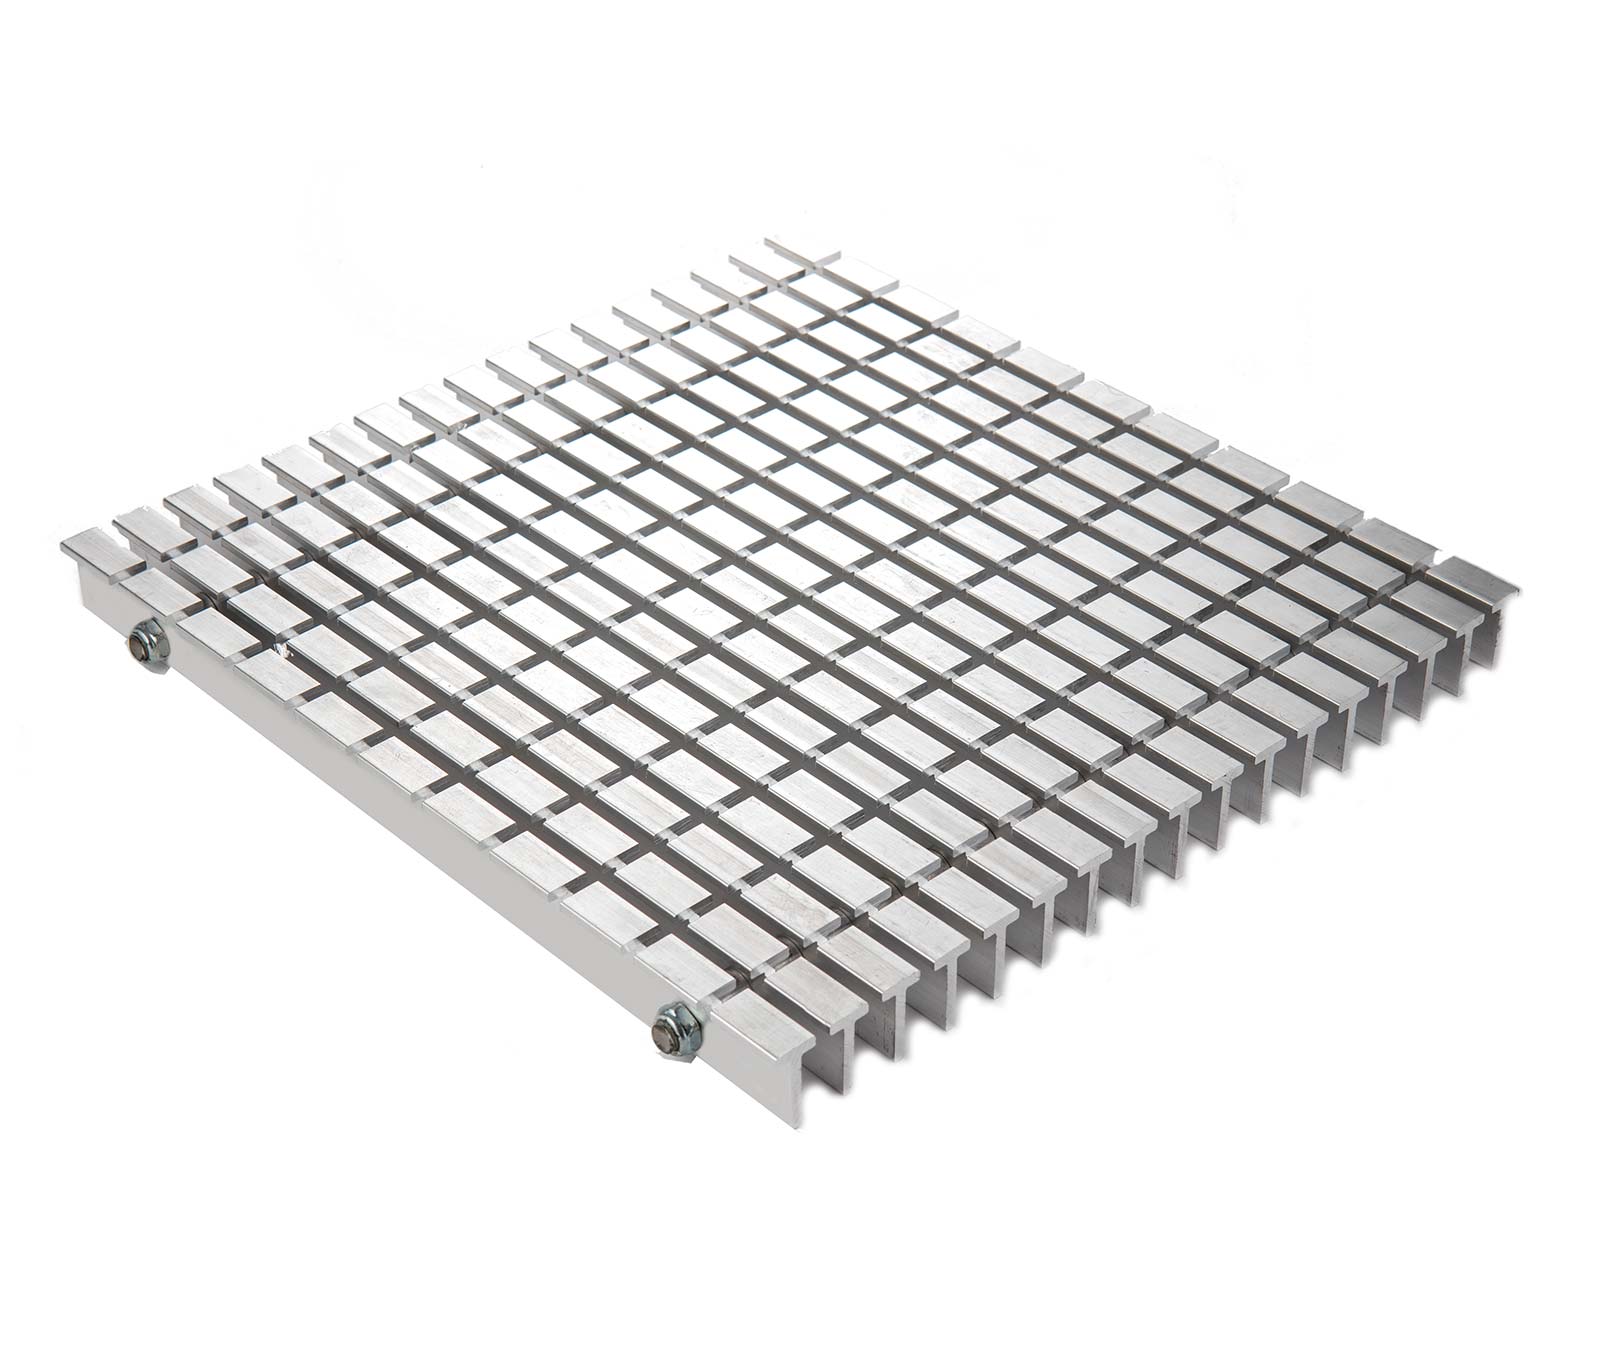 https://amarcoproducts.com/_media/products/g-550r-1-inch-rectangle-grid-foot-grille/images/g-550r-aluminum-entrance-grid-main.jpg